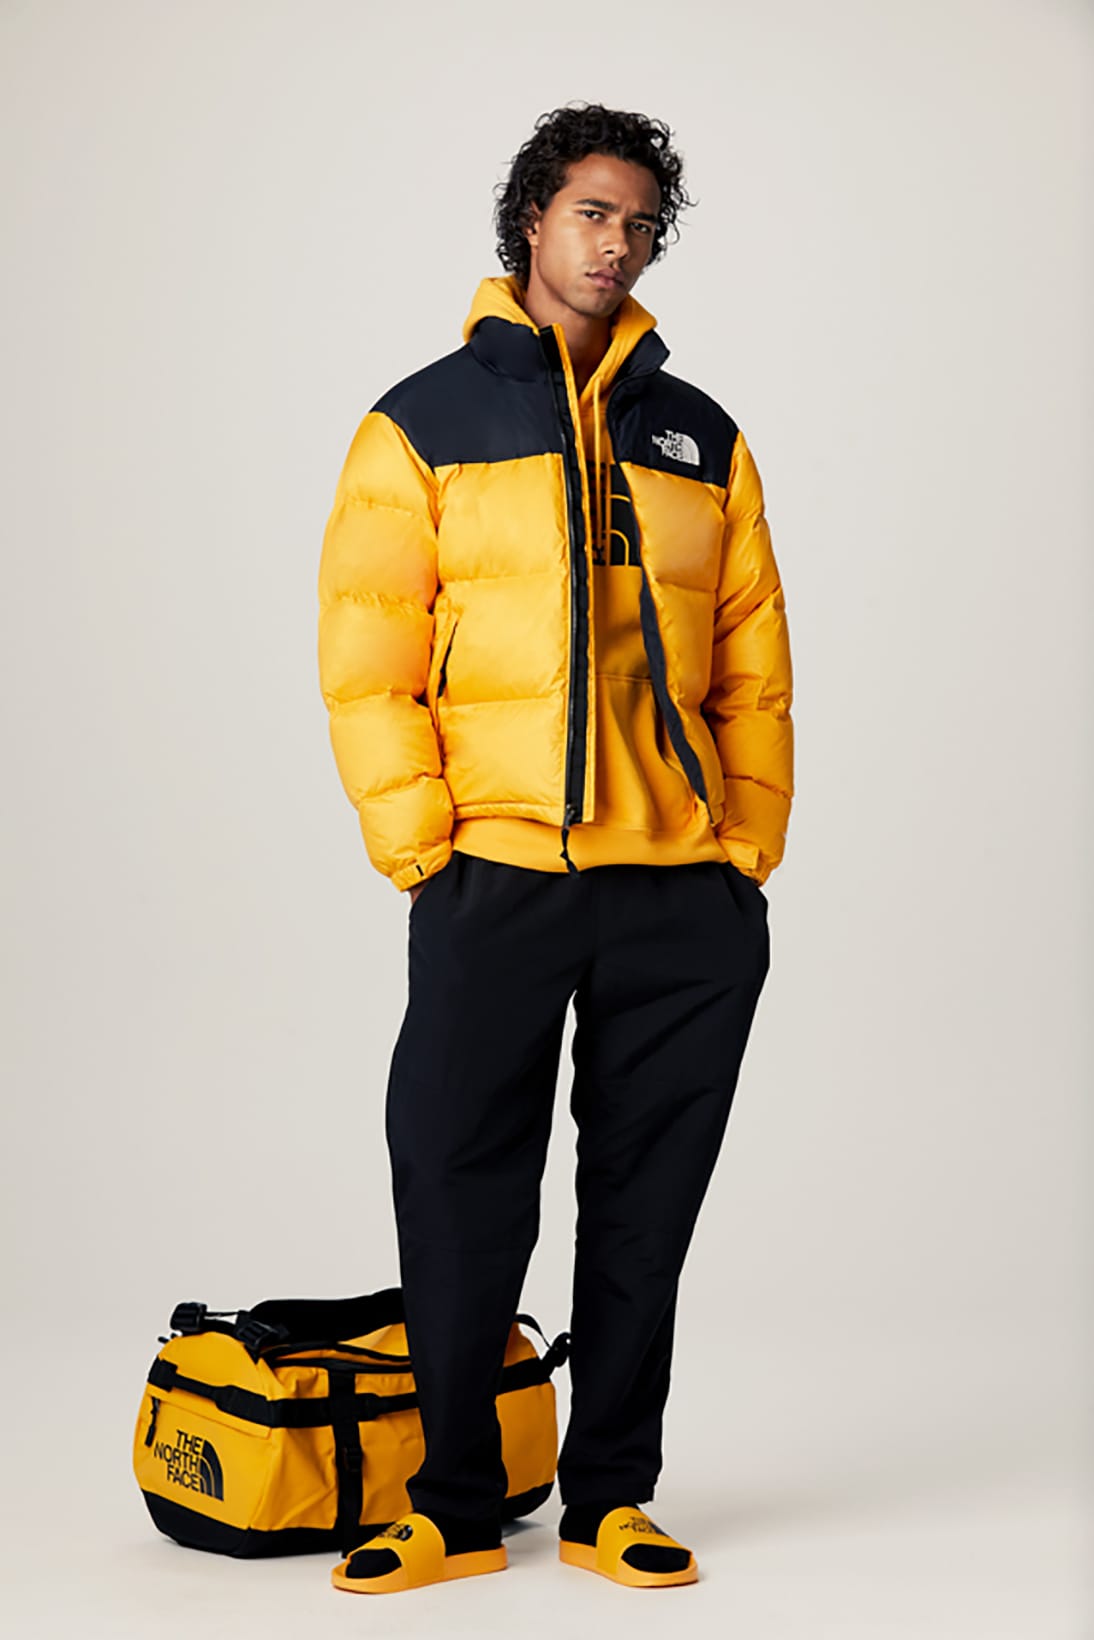 price for north face jackets